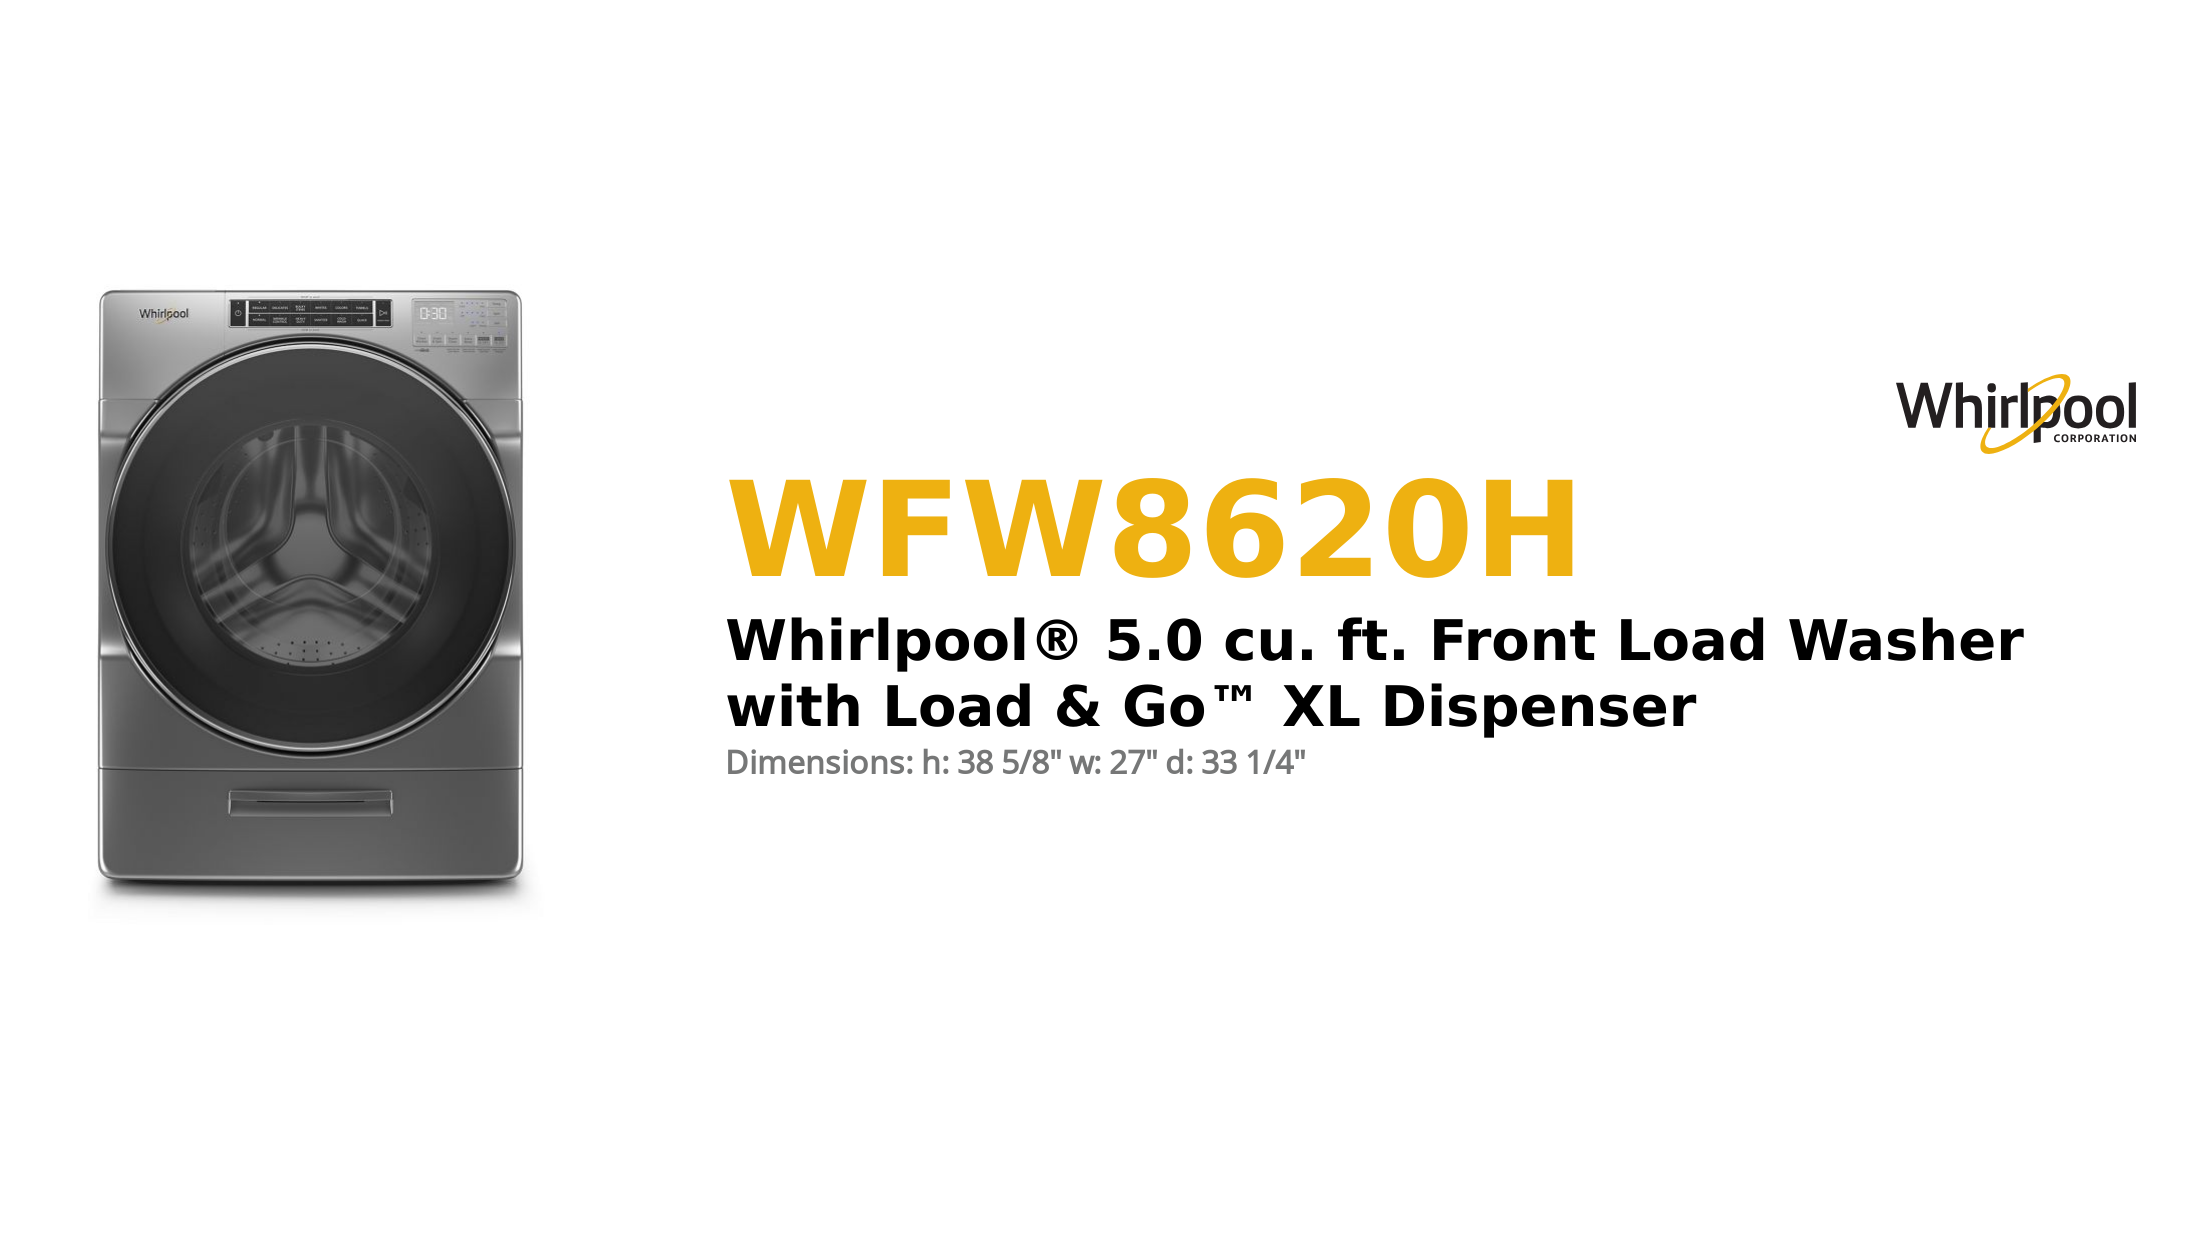 Whirlpool Washer WFW8620H